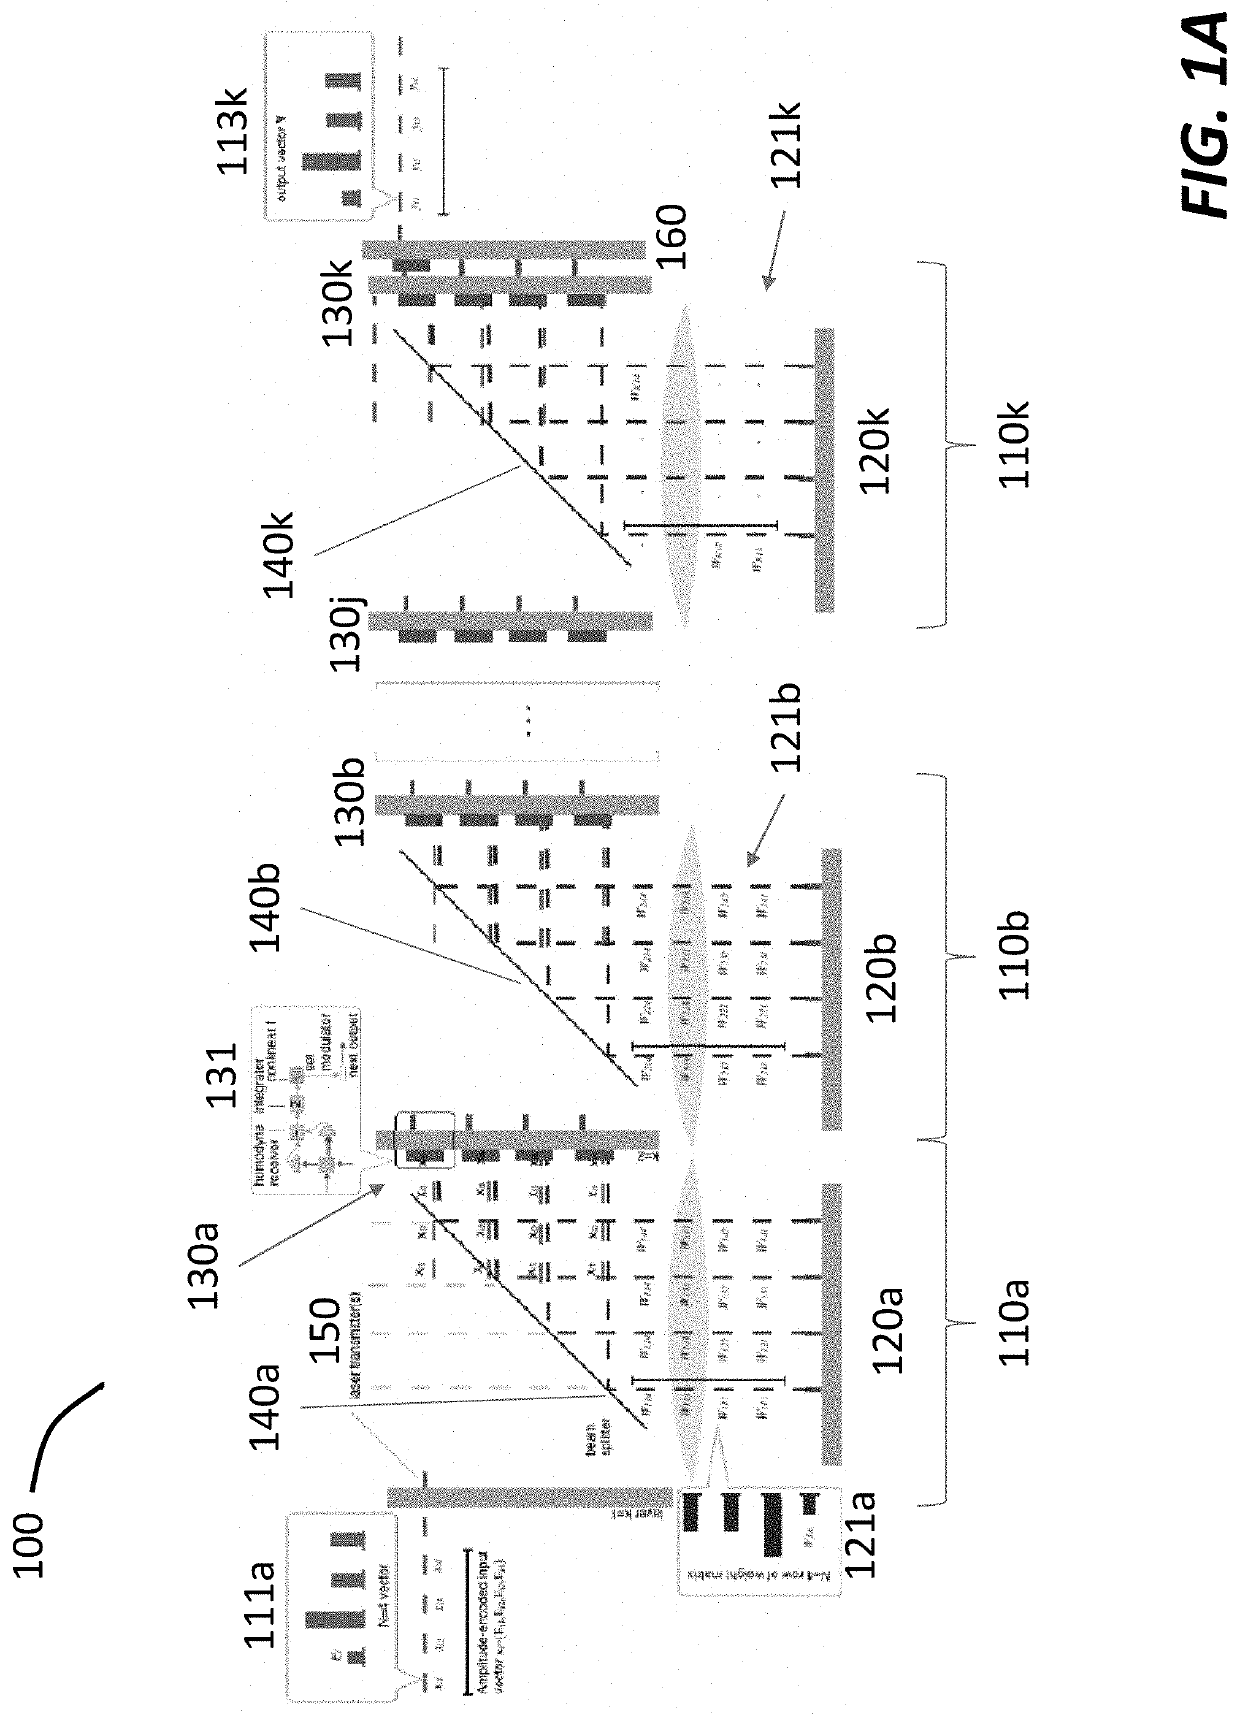 Serialized electro-optic neural network using optical weights encoding